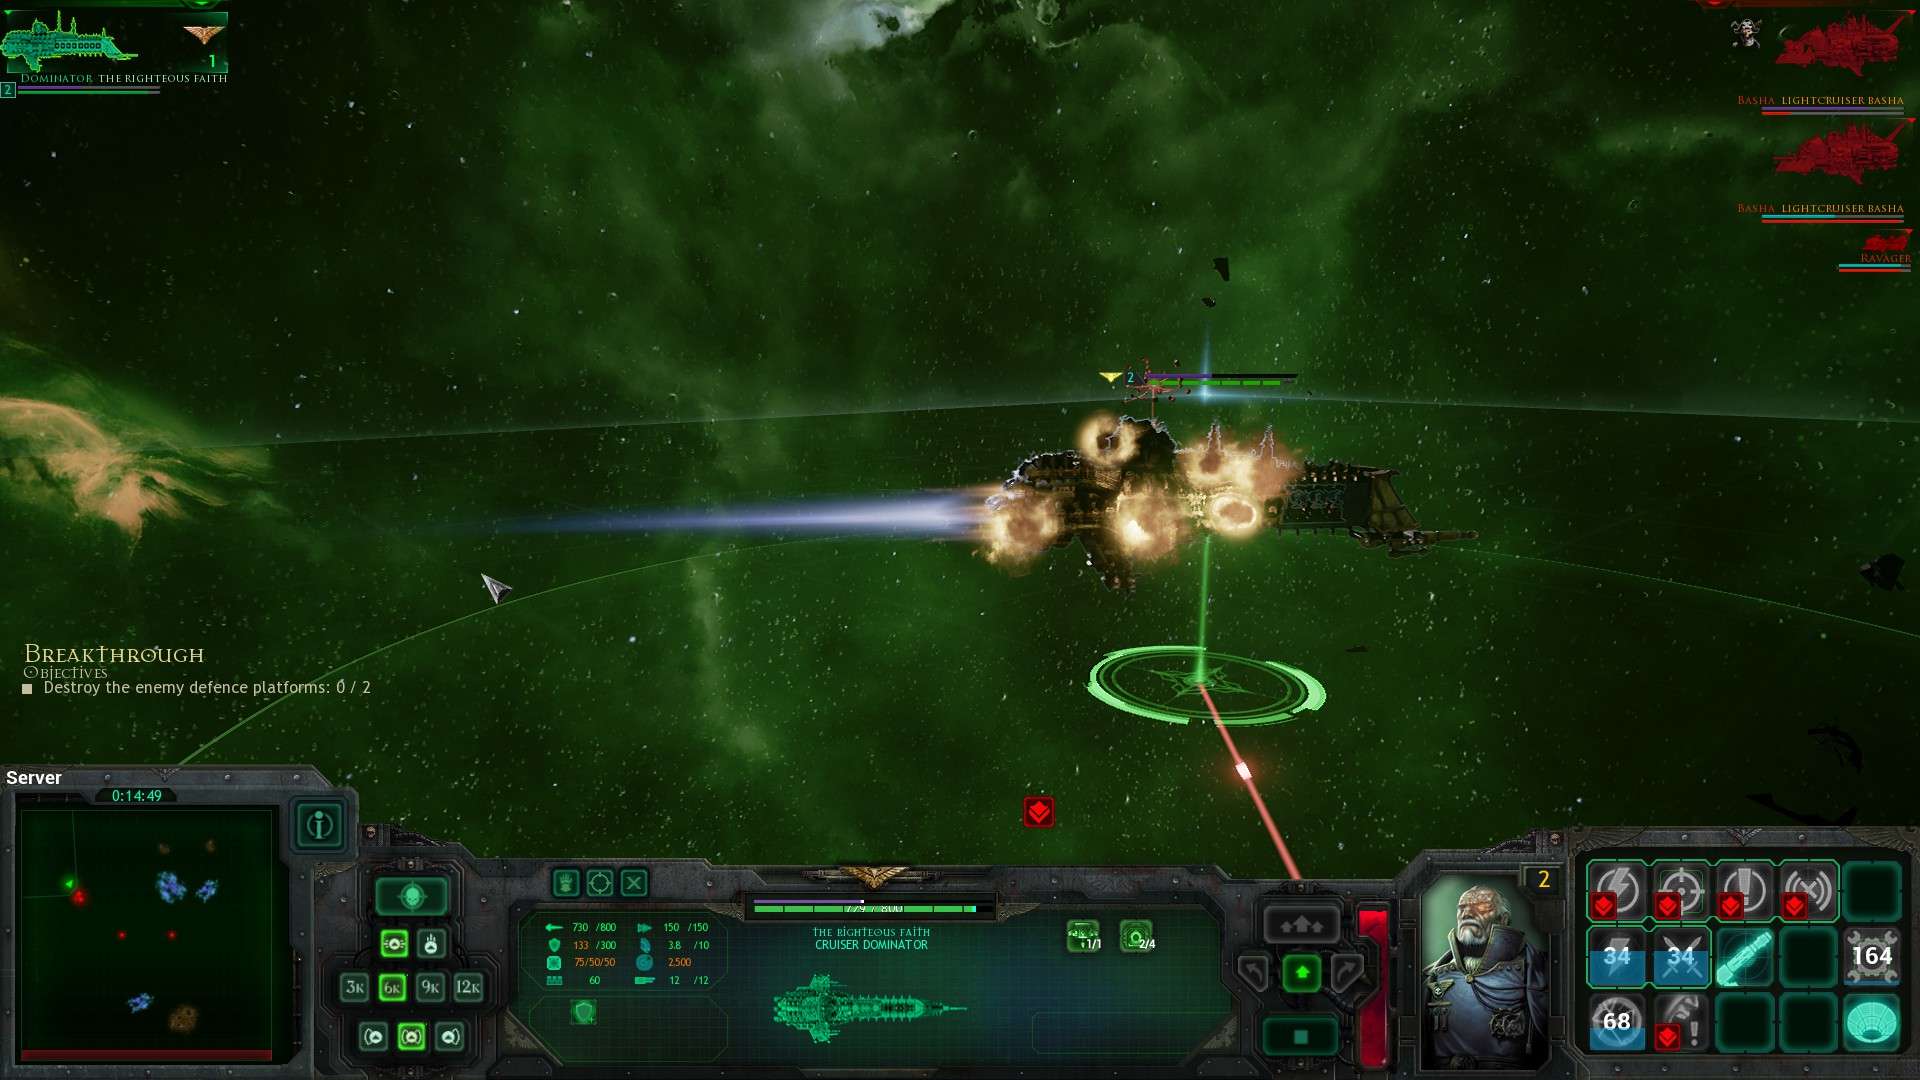 One of my favourite ships getting pulped by Orks. You'll be seeing this a lot. 